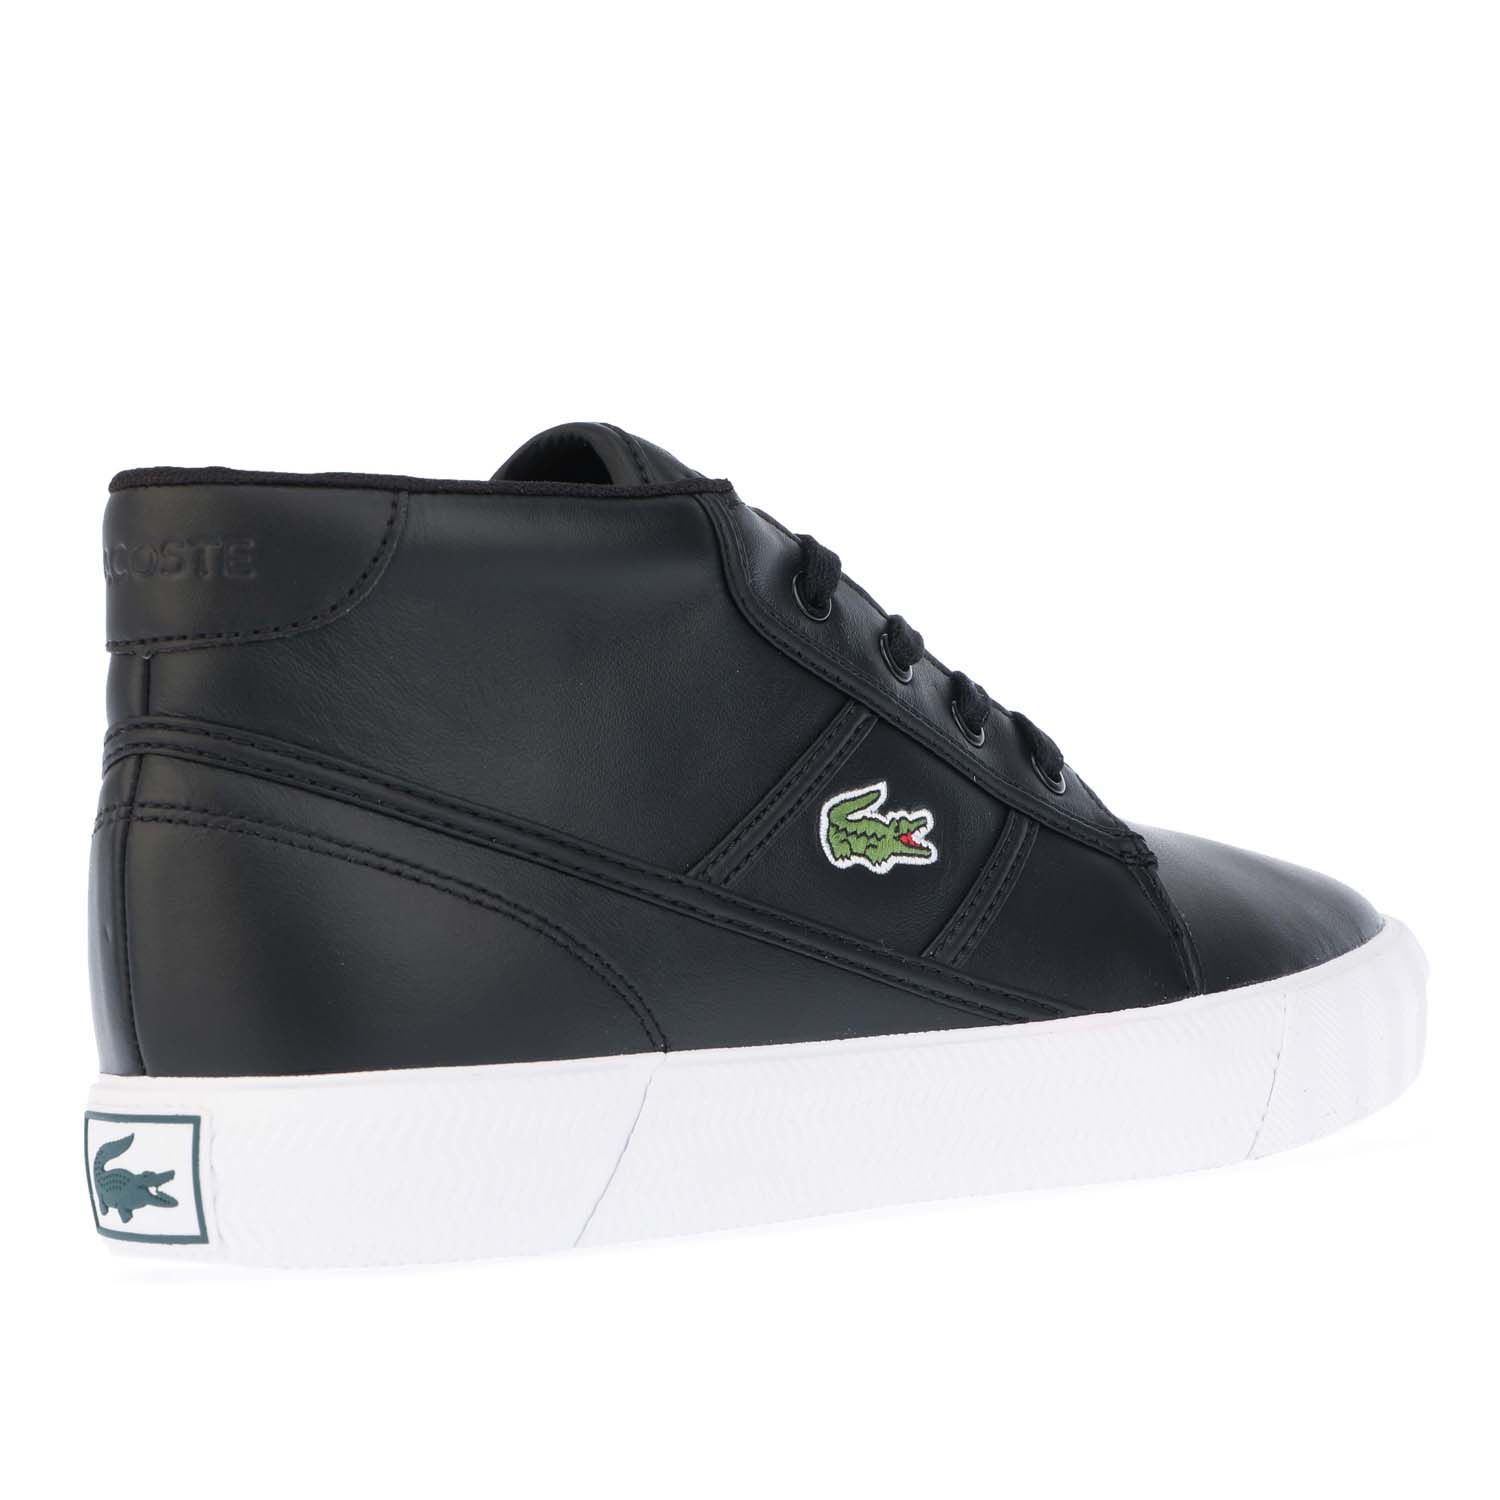 Mens Lacoste Gripshot Chukka Trainers in Black- Canvas and leather uppers.- Lace up fastening with comfortable flat laces.- Comfortable textile lining.- Ortholite sockliner for comfort and odour control.- Embroidered Lacoste lettered branding at tongue.- Contrast heel patch with debossed Lacoste lettered branding.- Embossed crocodile at back heel.- Embroidered crocodile to side.- Rubber sole.- Ref: 742CMA0035312